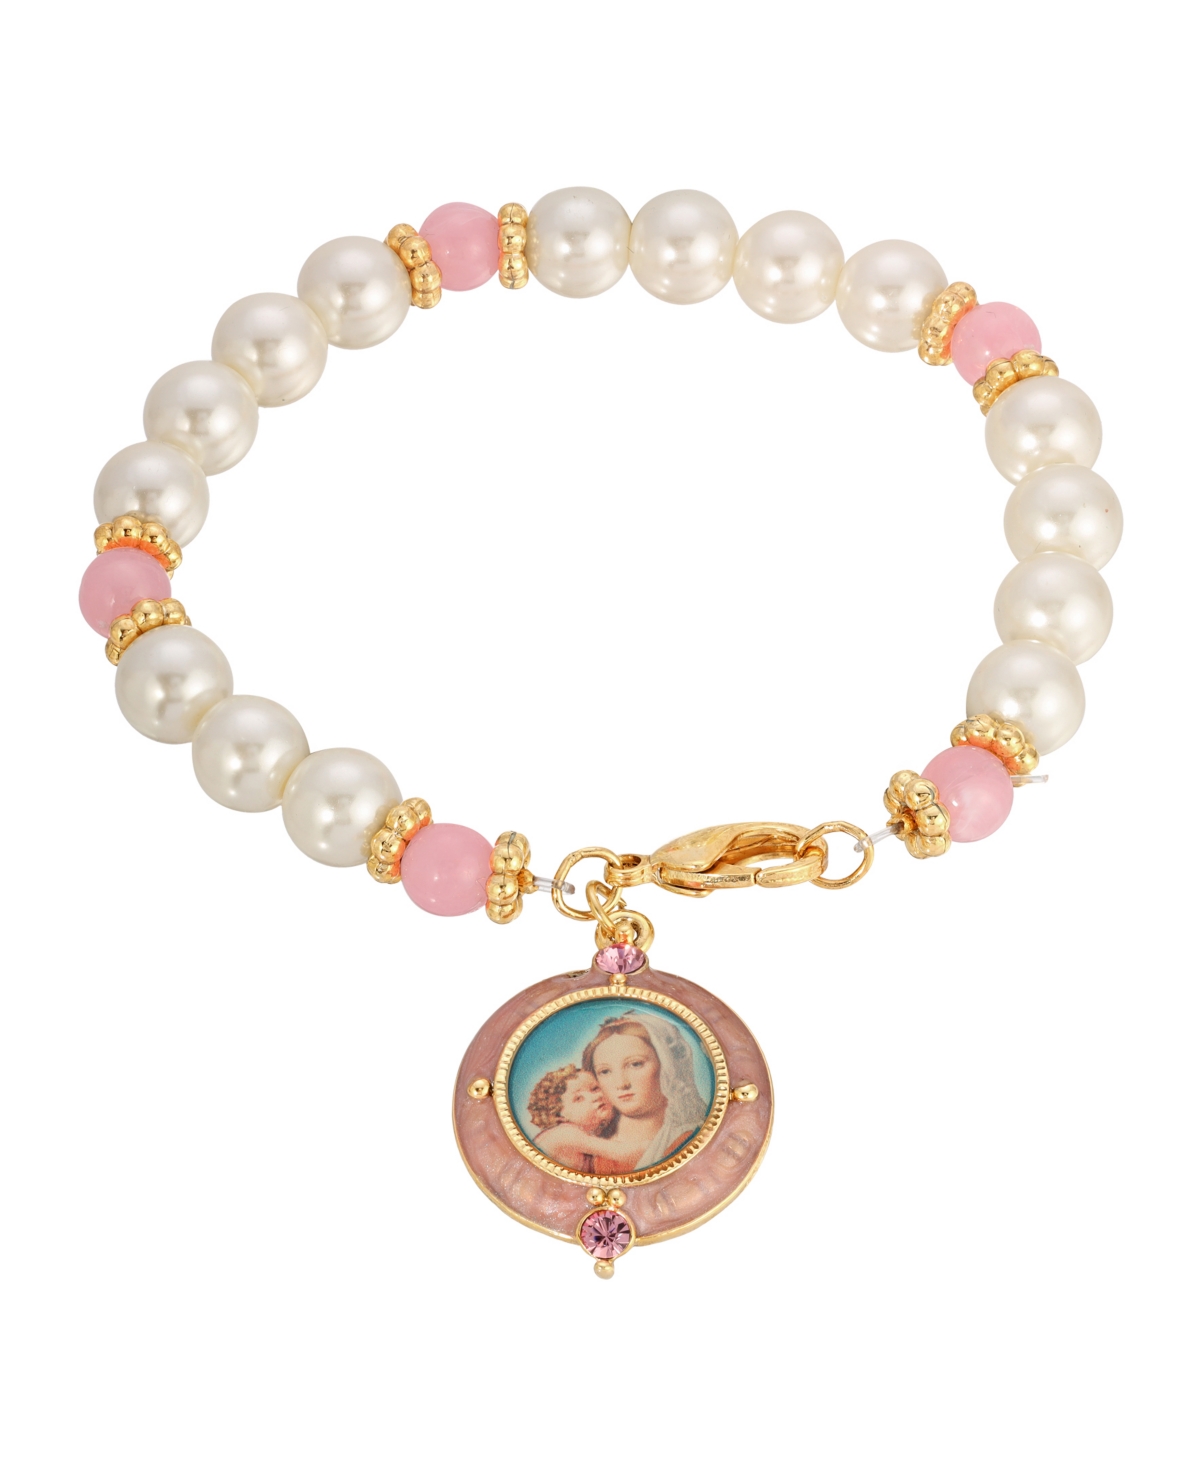 14K Gold-Dipped Imitation Pearl Mary and Child Image Charm Bracelet - Pink